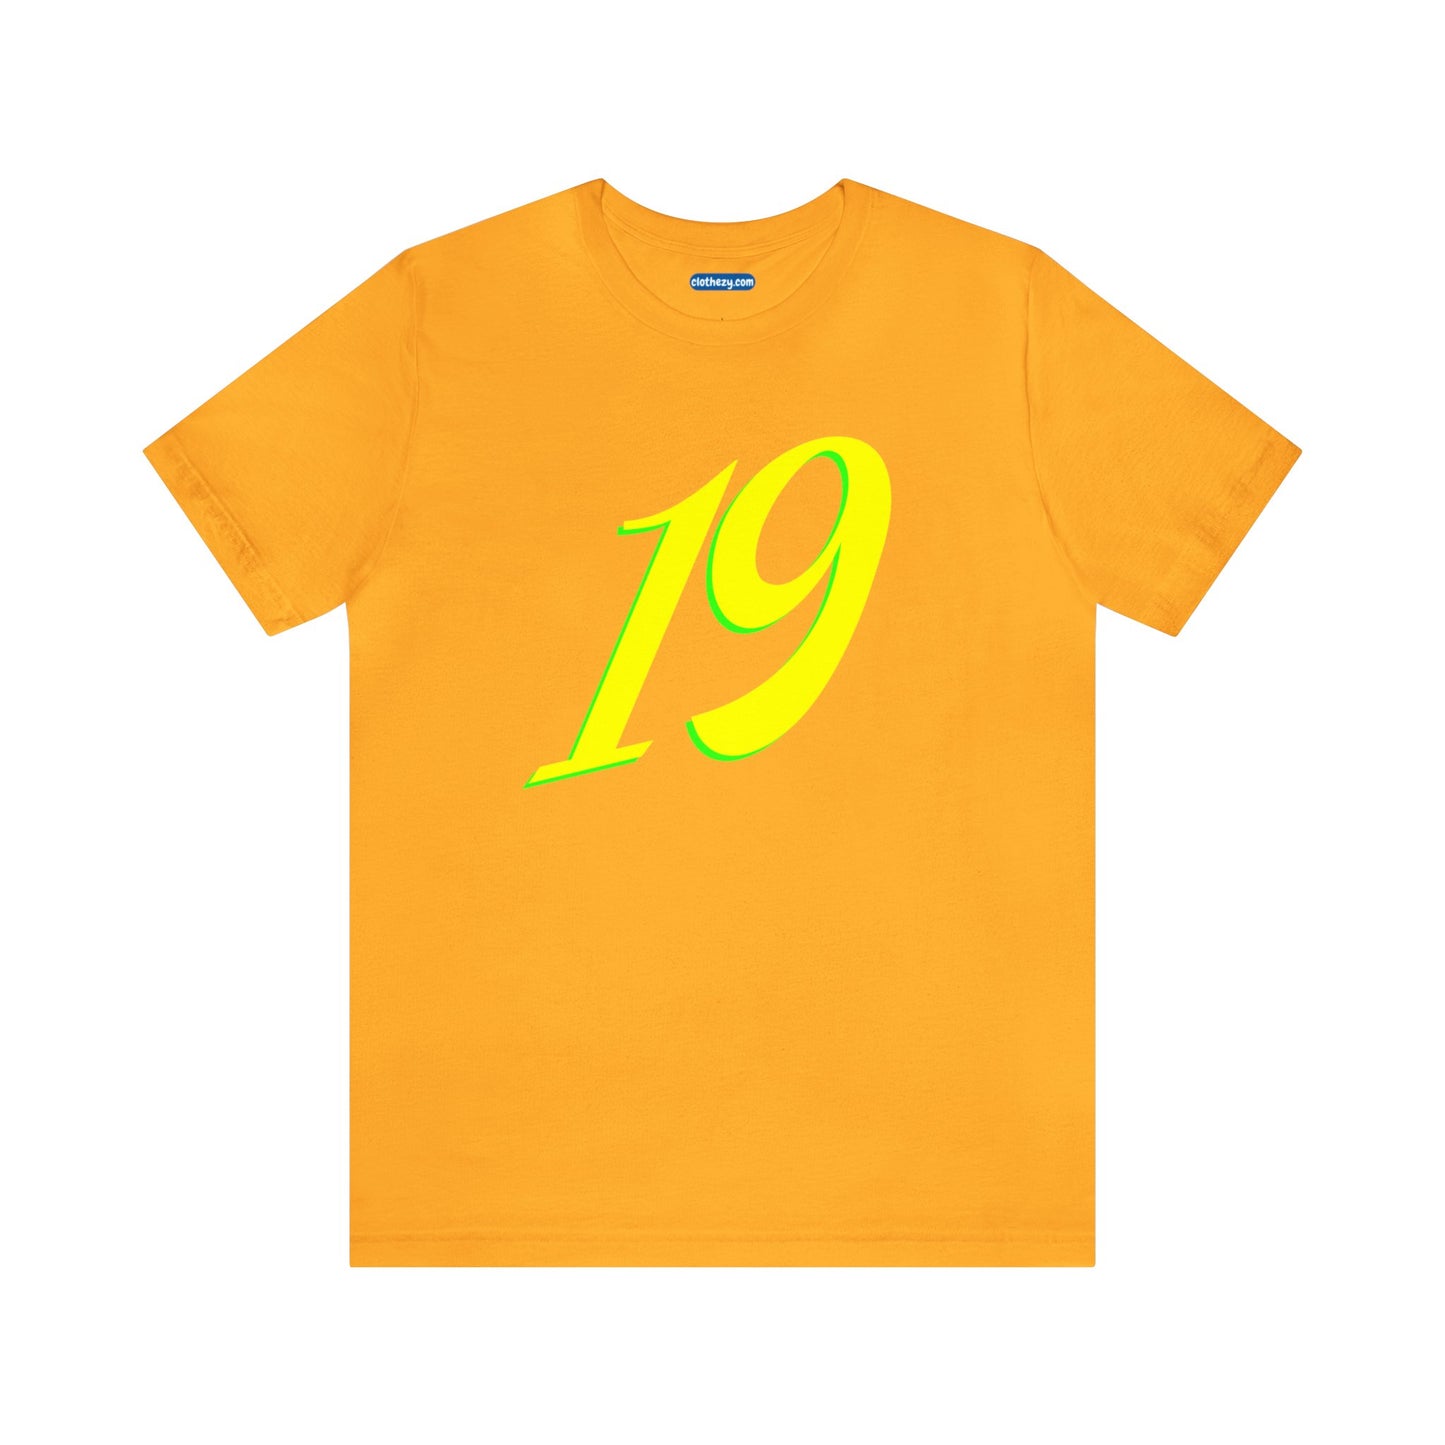 Number 19 Design - Soft Cotton Tee for birthdays and celebrations, Gift for friends and family, Multiple Options by clothezy.com in Green Heather Size Small - Buy Now